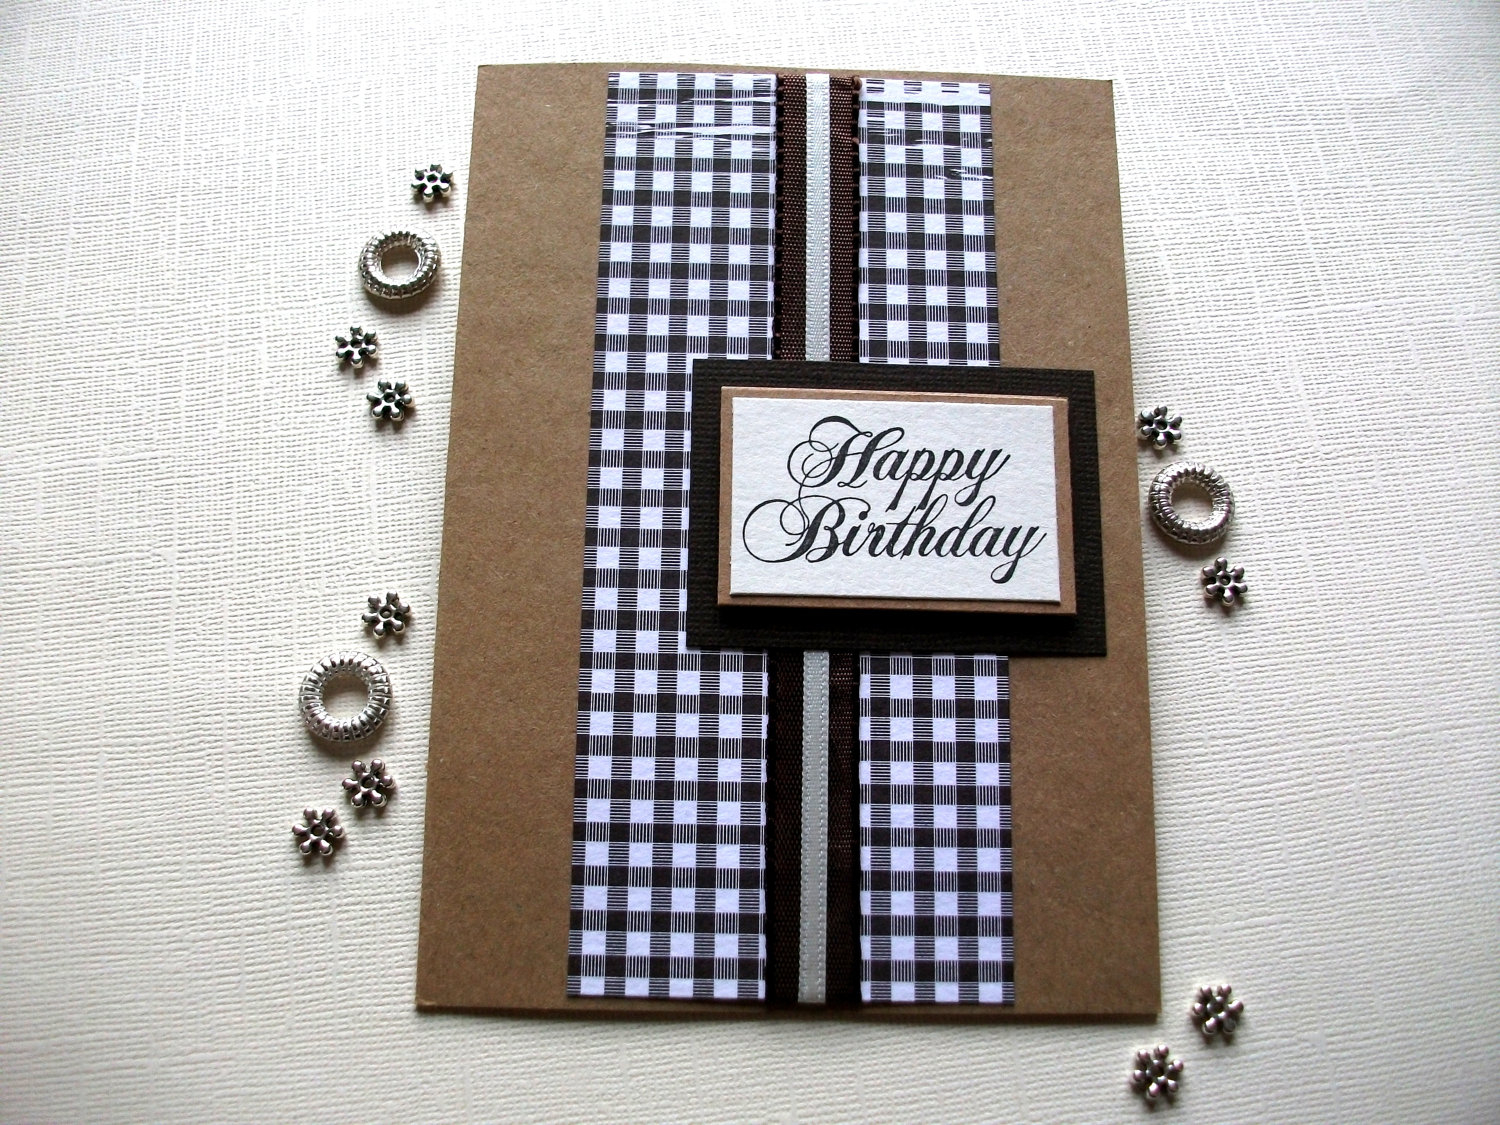 21St Birthday Card Making Ideas 10 Wonderful And Attractive Birthday Cards To Send To Your Beloved